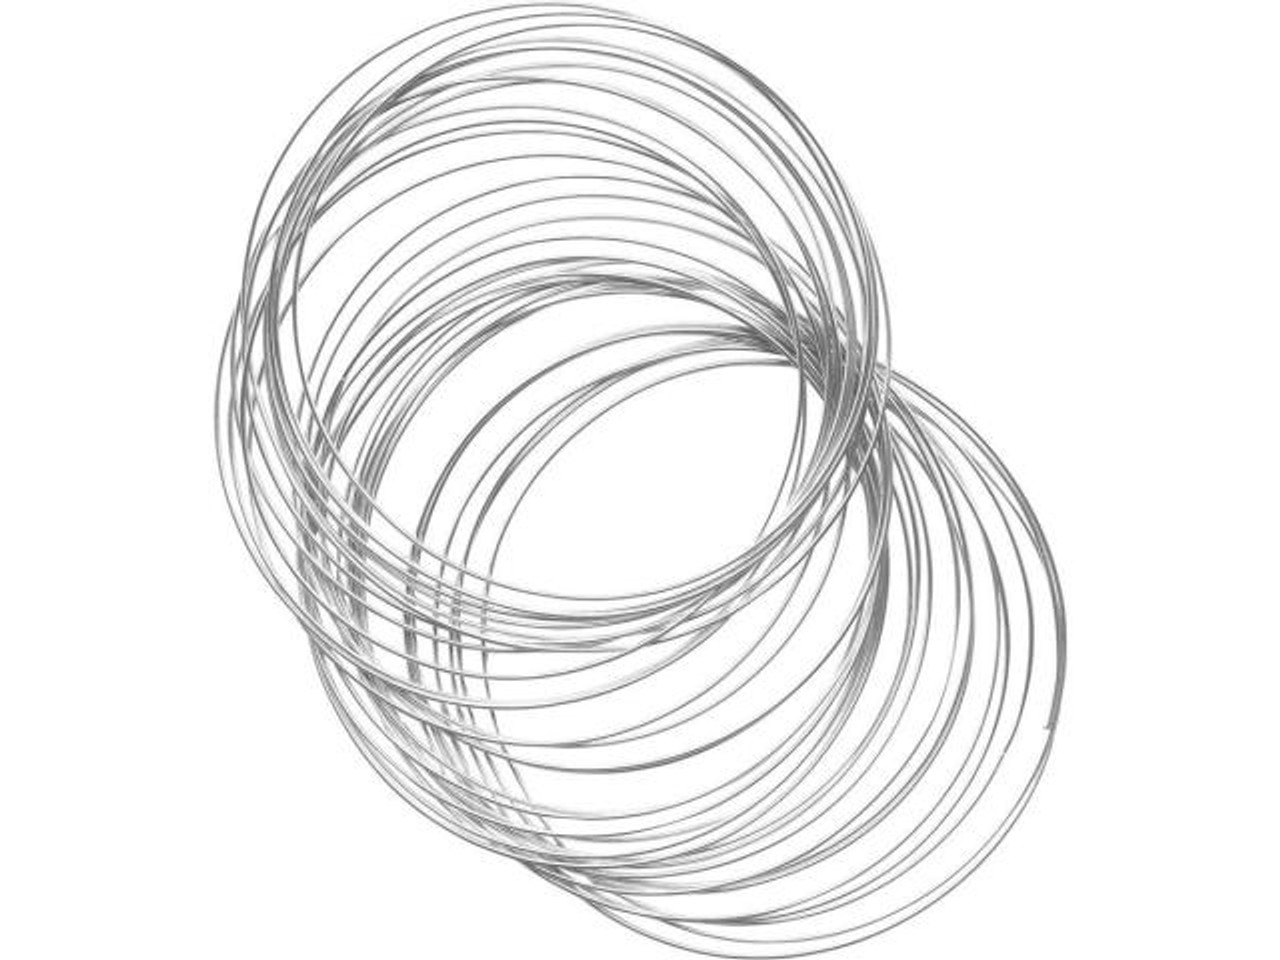 46-170-10-14 Aluminum Craft & Jewelry Wire, 1mm, 12 meter - Silver Color -  Rings & Things